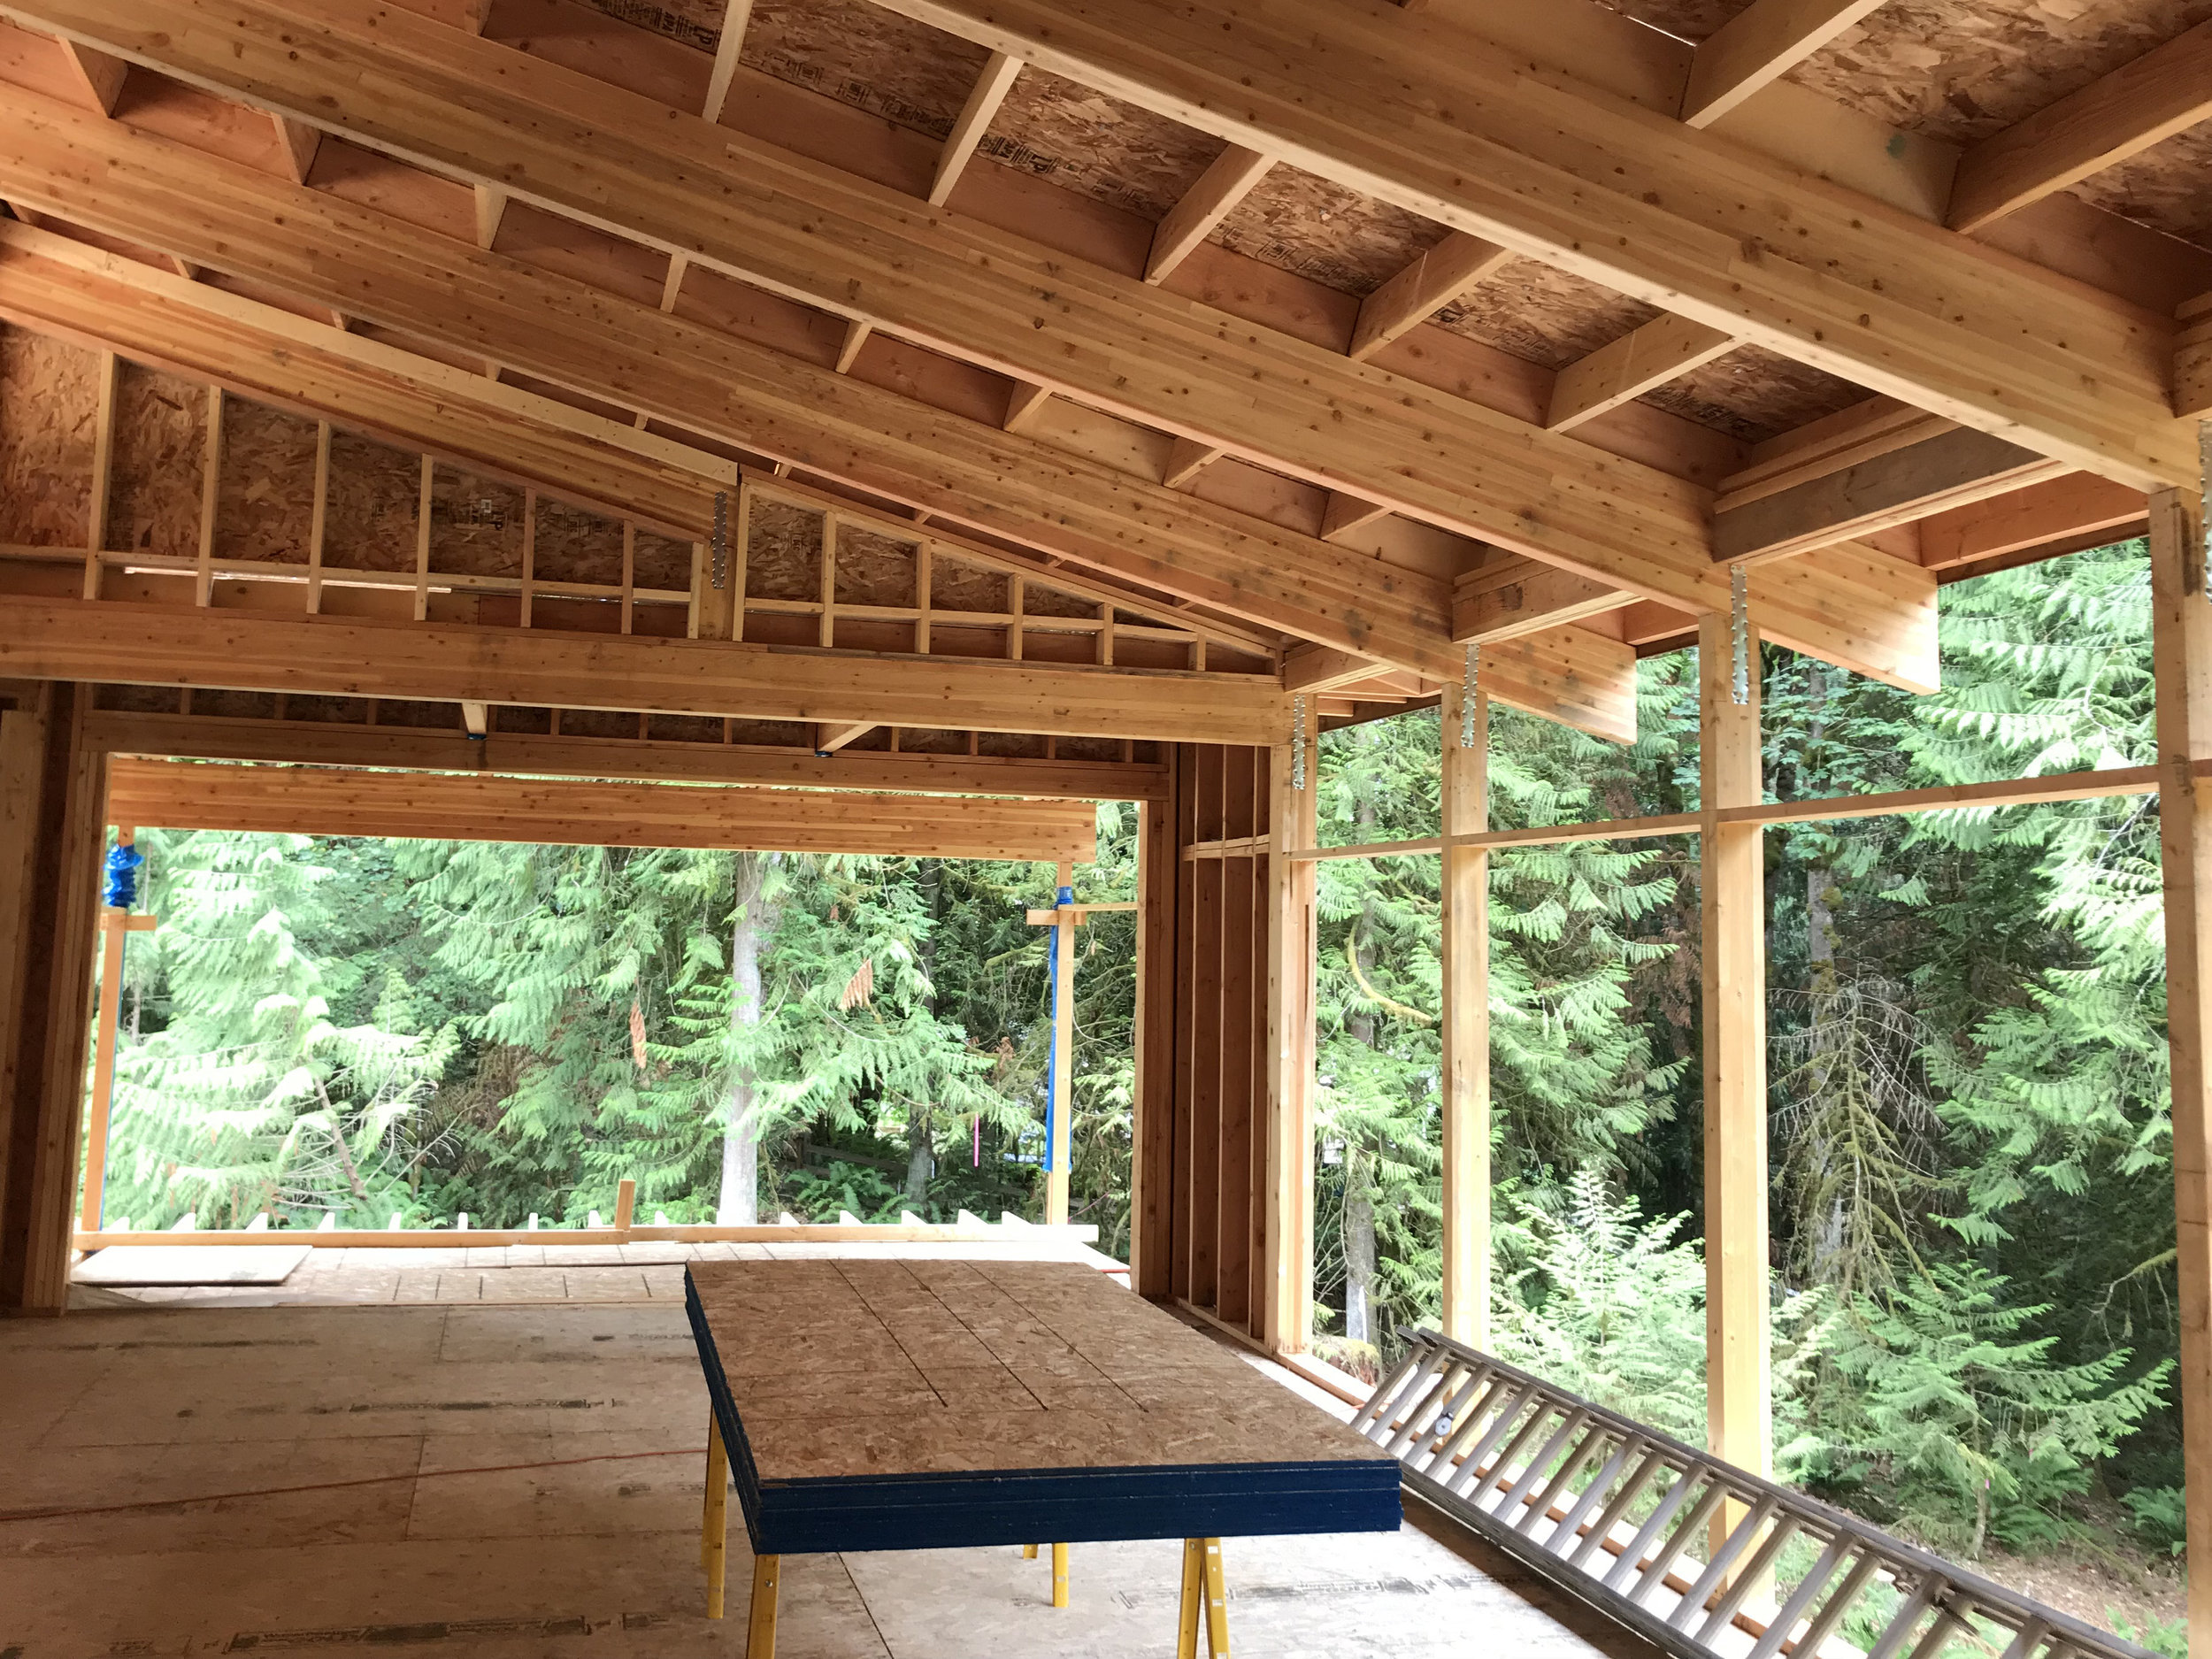   Lifting the roof for the clerestory creates a sloped roof over great room. The laminated beans which will remain exposed in the finished house, draw the eye through the window wall to support the 2’ deep overhangs and draw the eye down to the view.